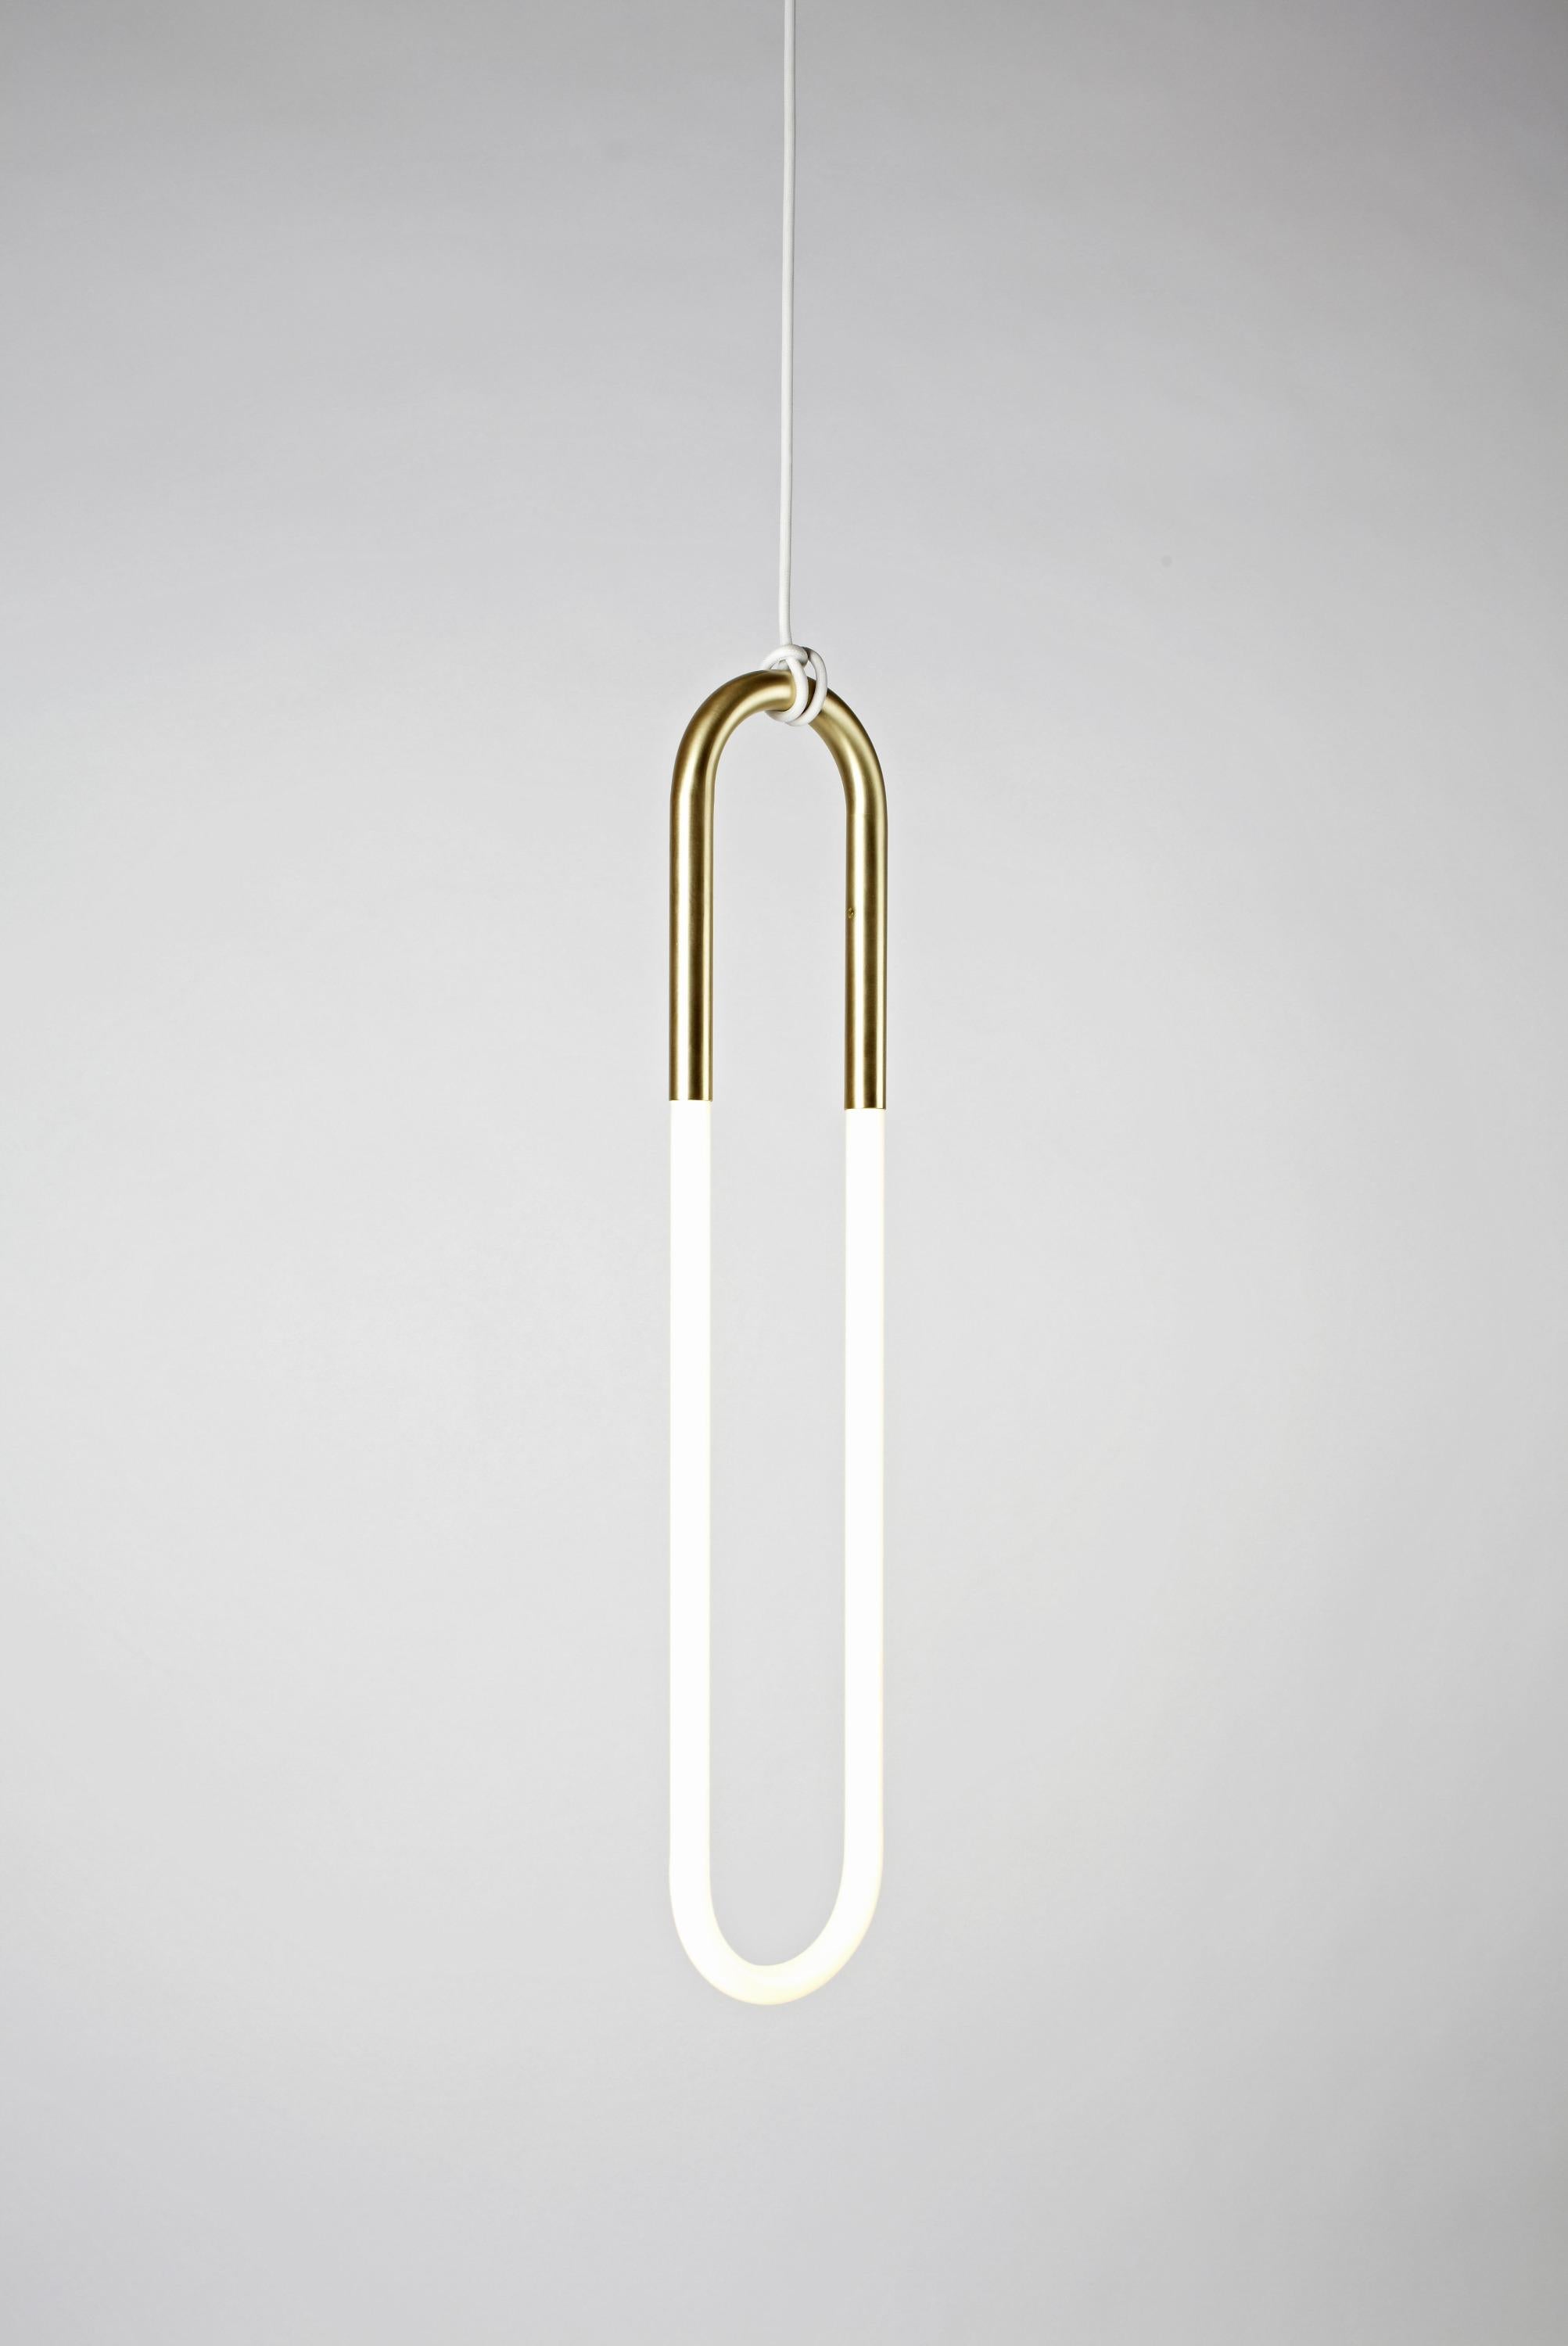 Jewelry is the inspiration for Rudi, a series of pendant lamps named after designer Lukas Peet's father, a jeweler. Rudi is made from bent metal tubes that hold handmade cold cathode lamps, with a satin brass finish. The fixtures hang from their